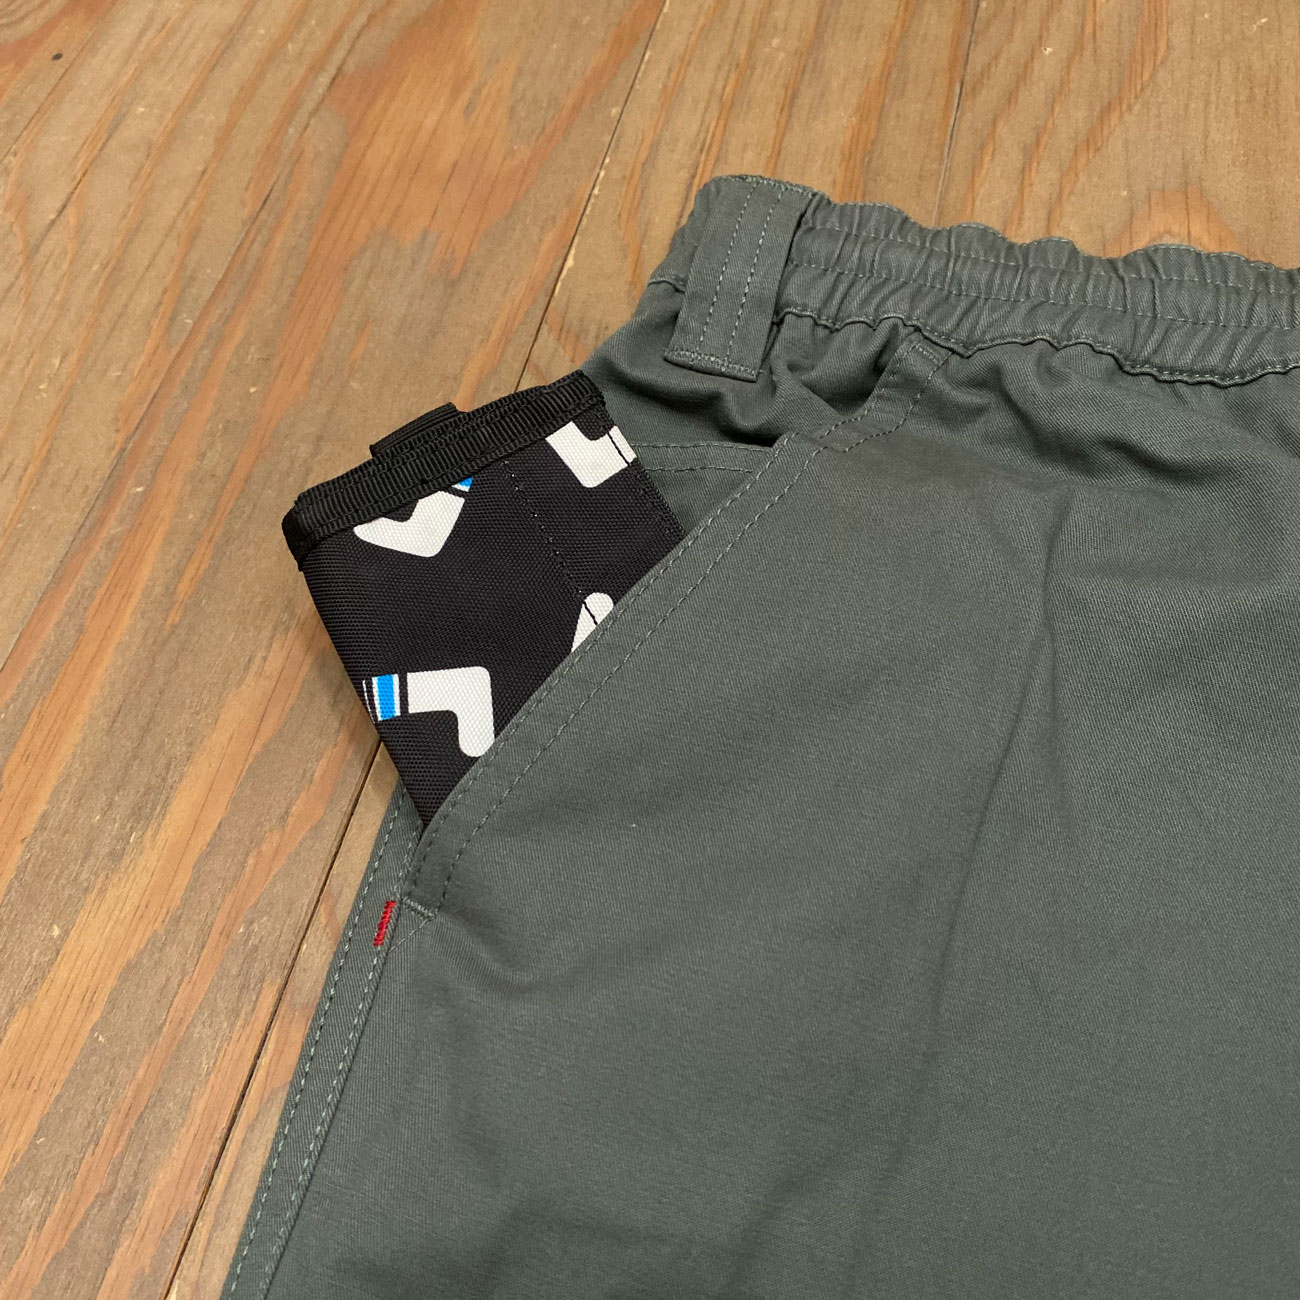 THEORIES LOUNGE SHORTS